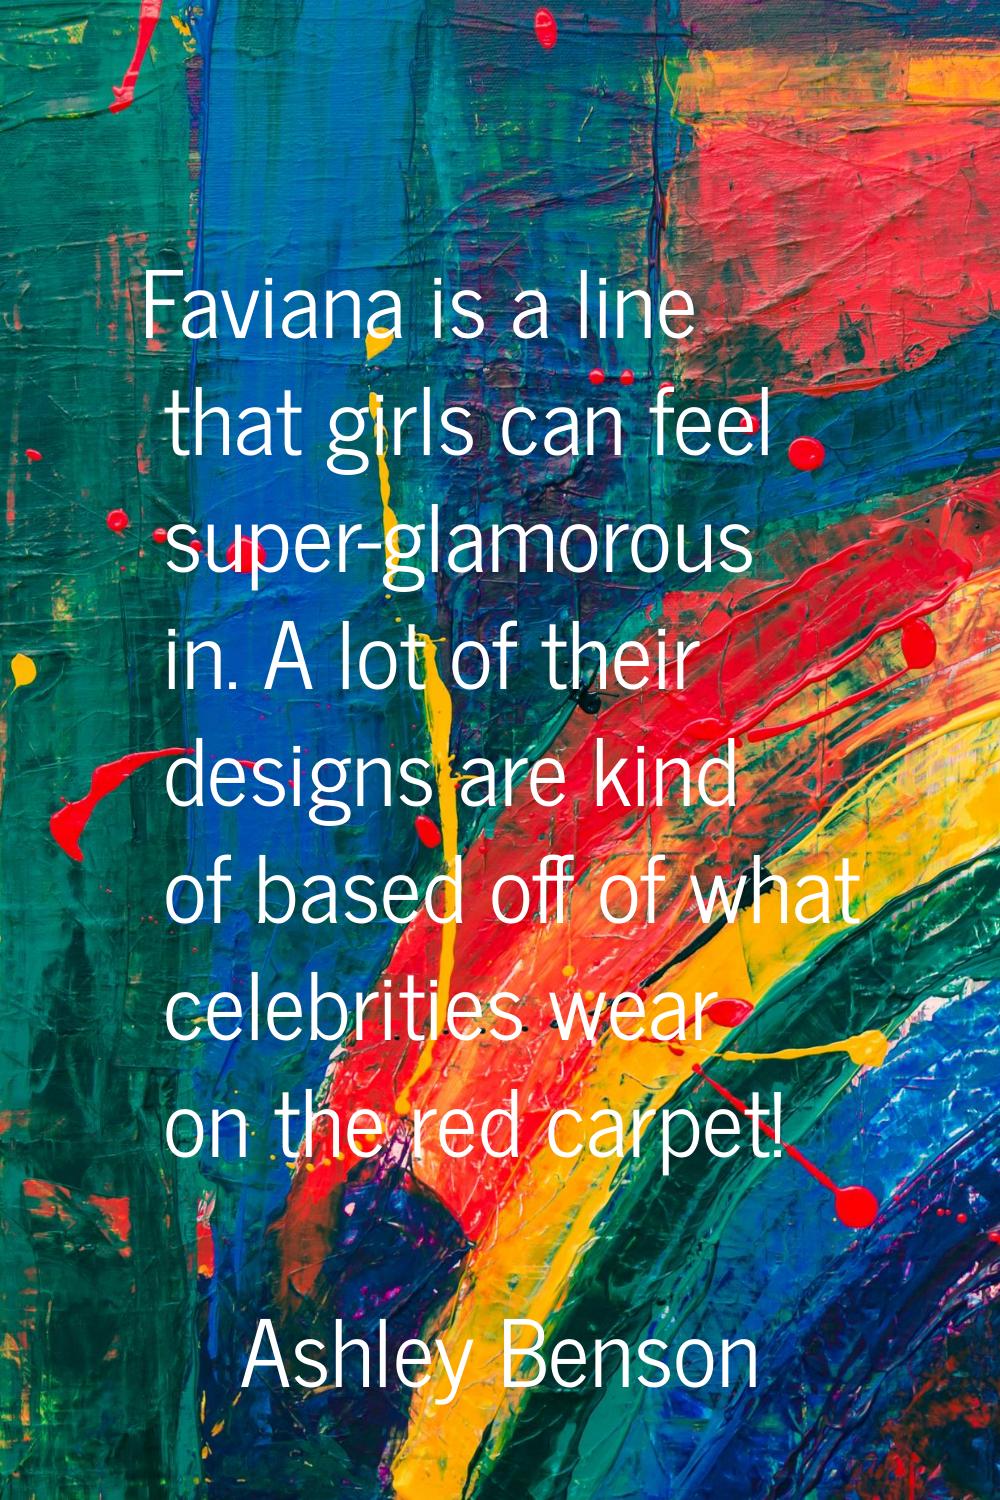 Faviana is a line that girls can feel super-glamorous in. A lot of their designs are kind of based 